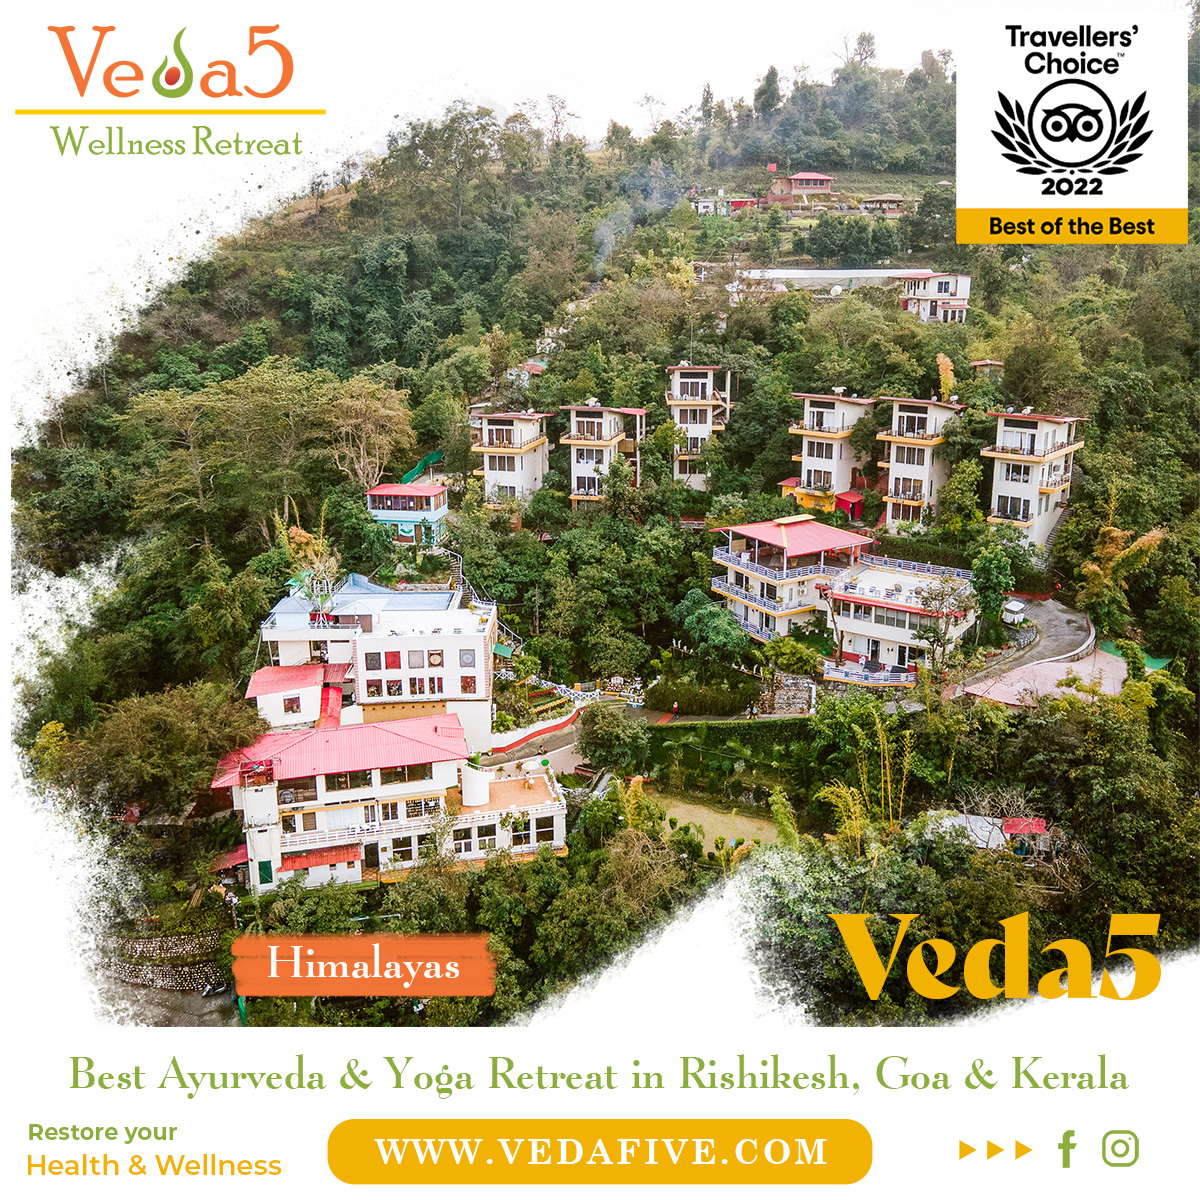 Benefits of Visiting Veda5 to Experience Ayurveda and Yoga Practices for Health and Wellness